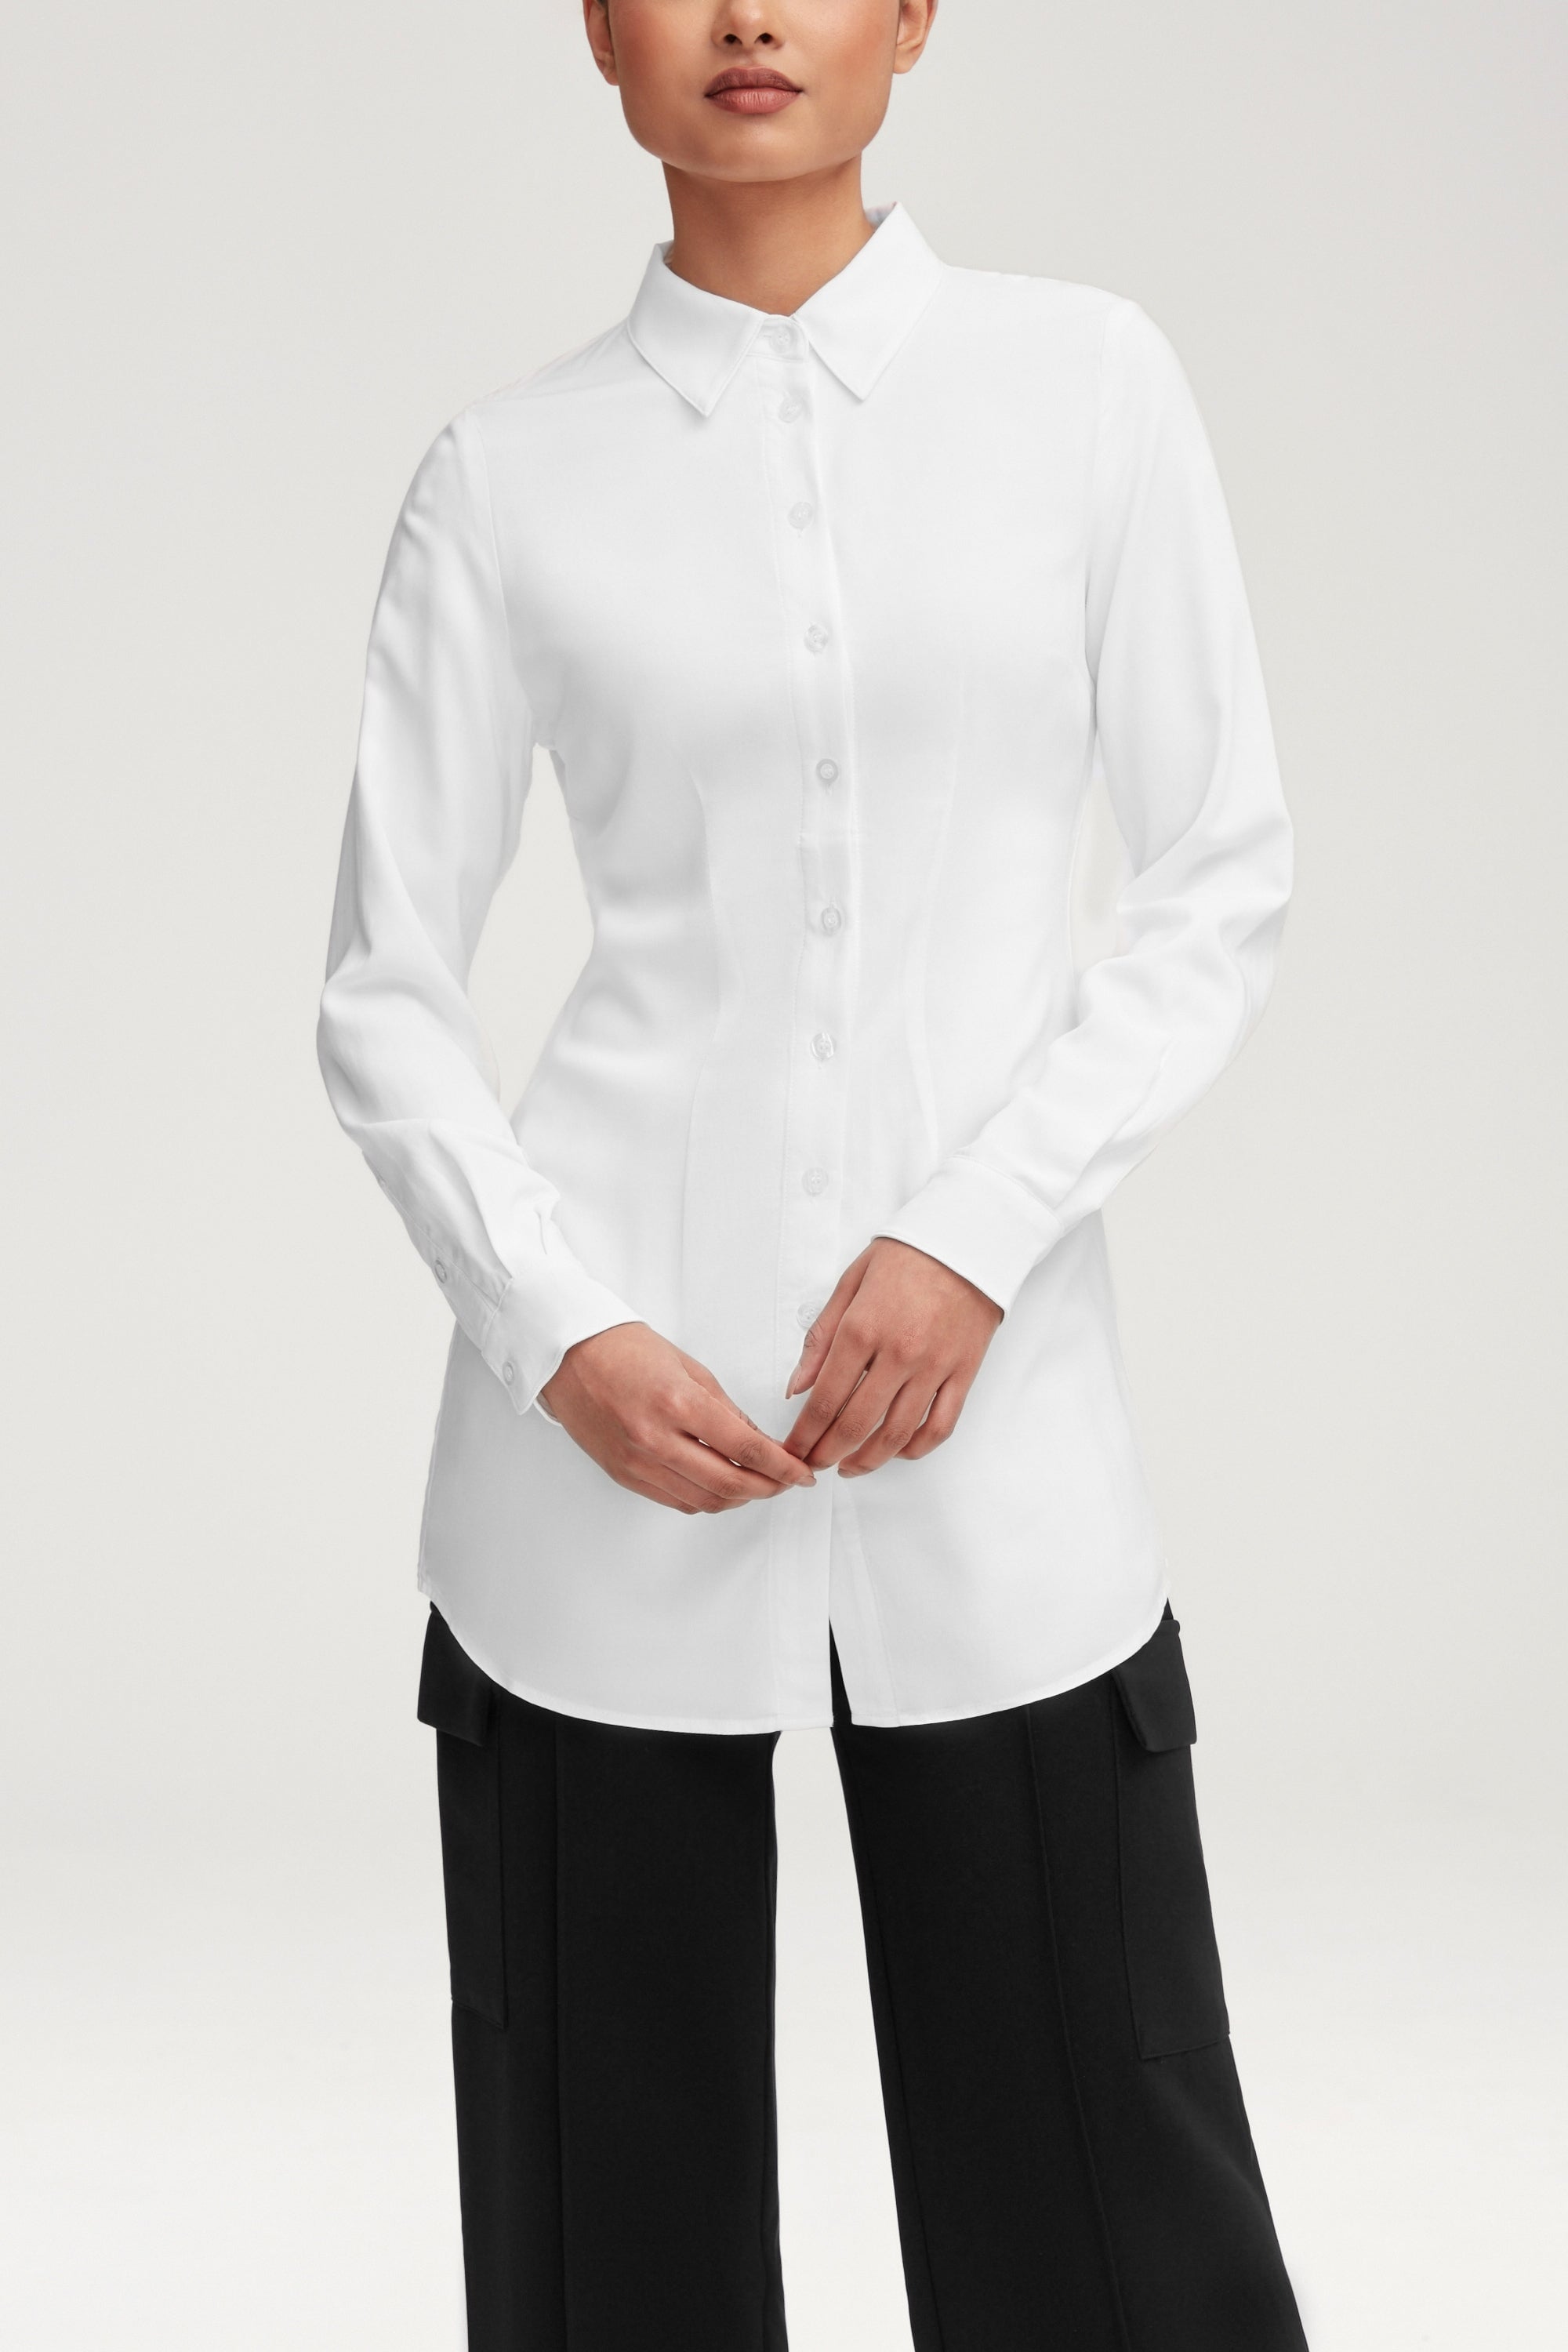 Sarah Fitted Button Down Top - White Clothing epschoolboard 